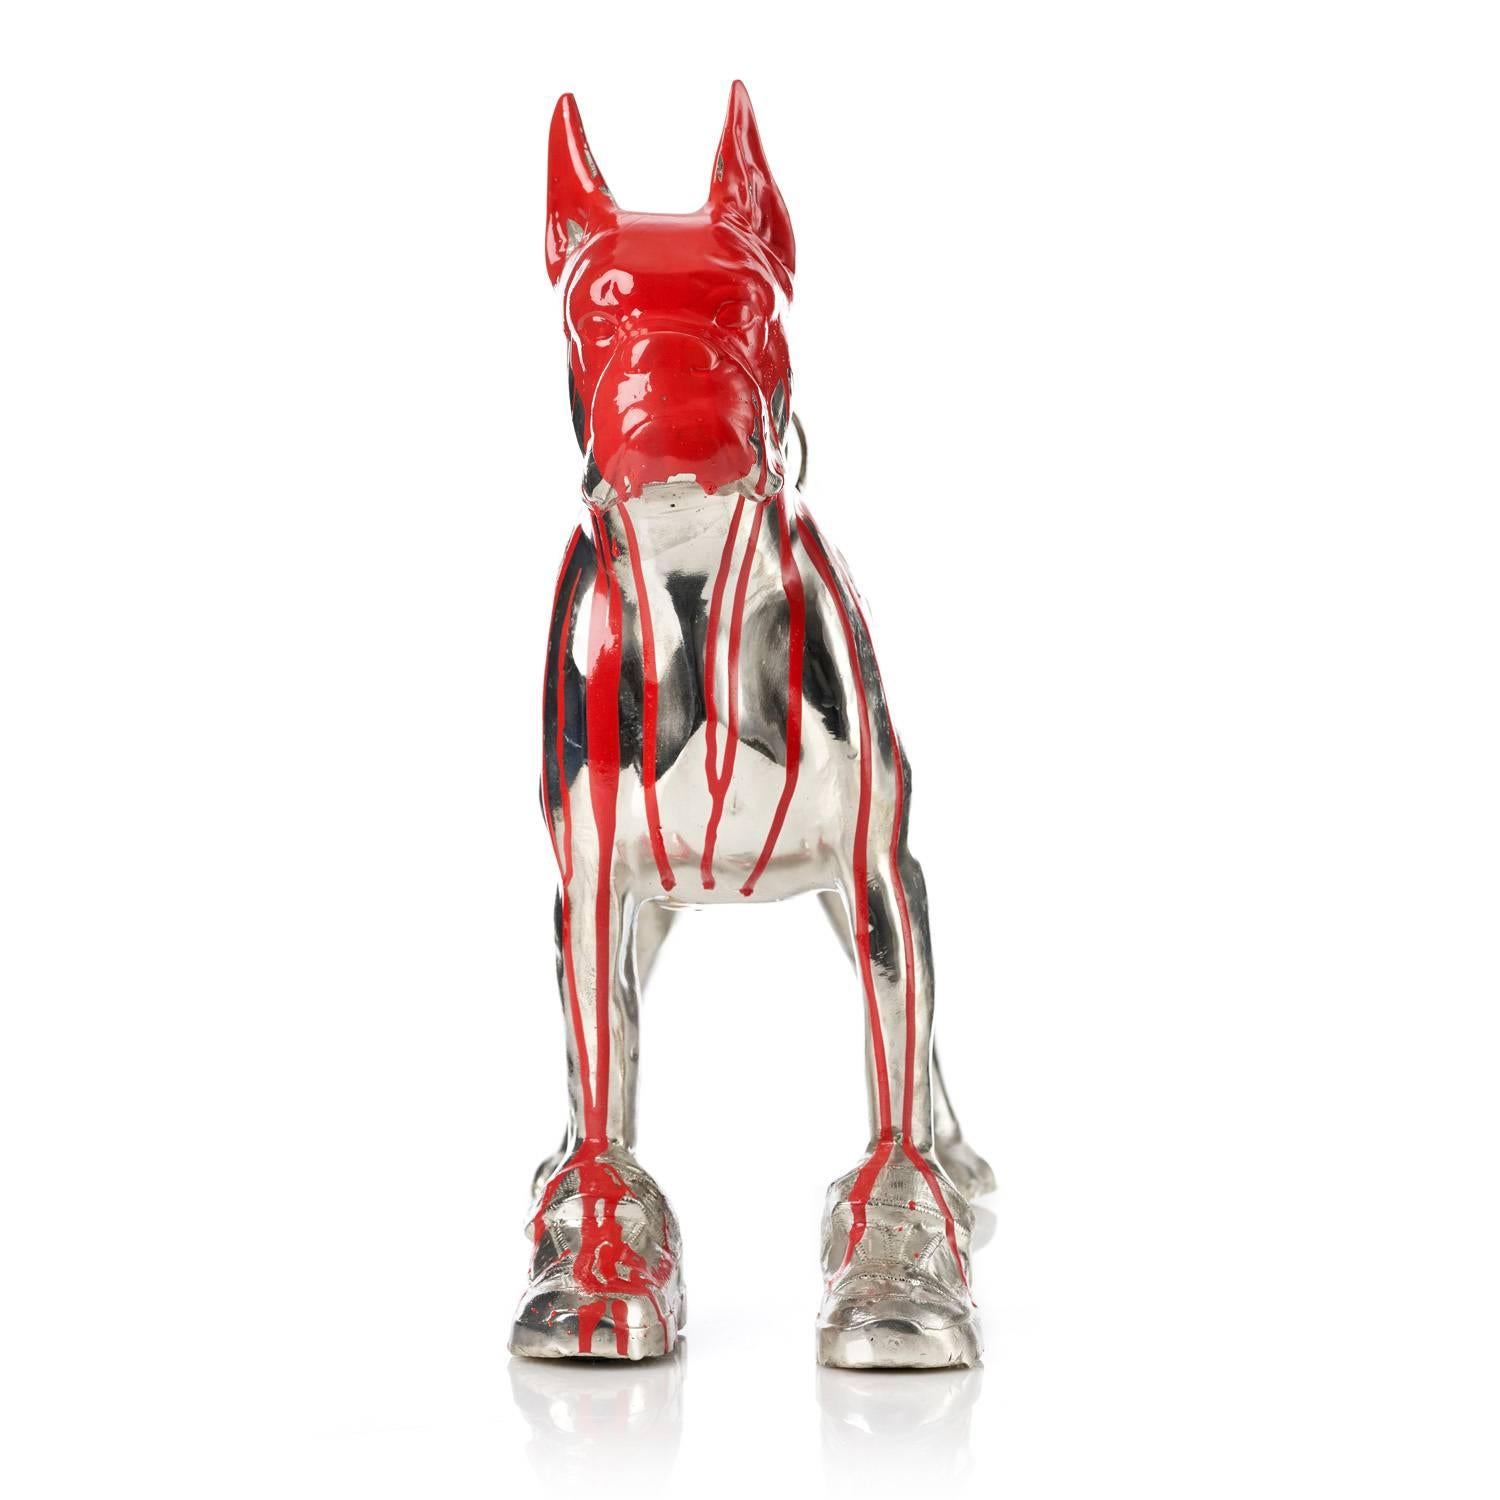 Cloned Bulldog with pet bottle (red) - Sculpture by William Sweetlove